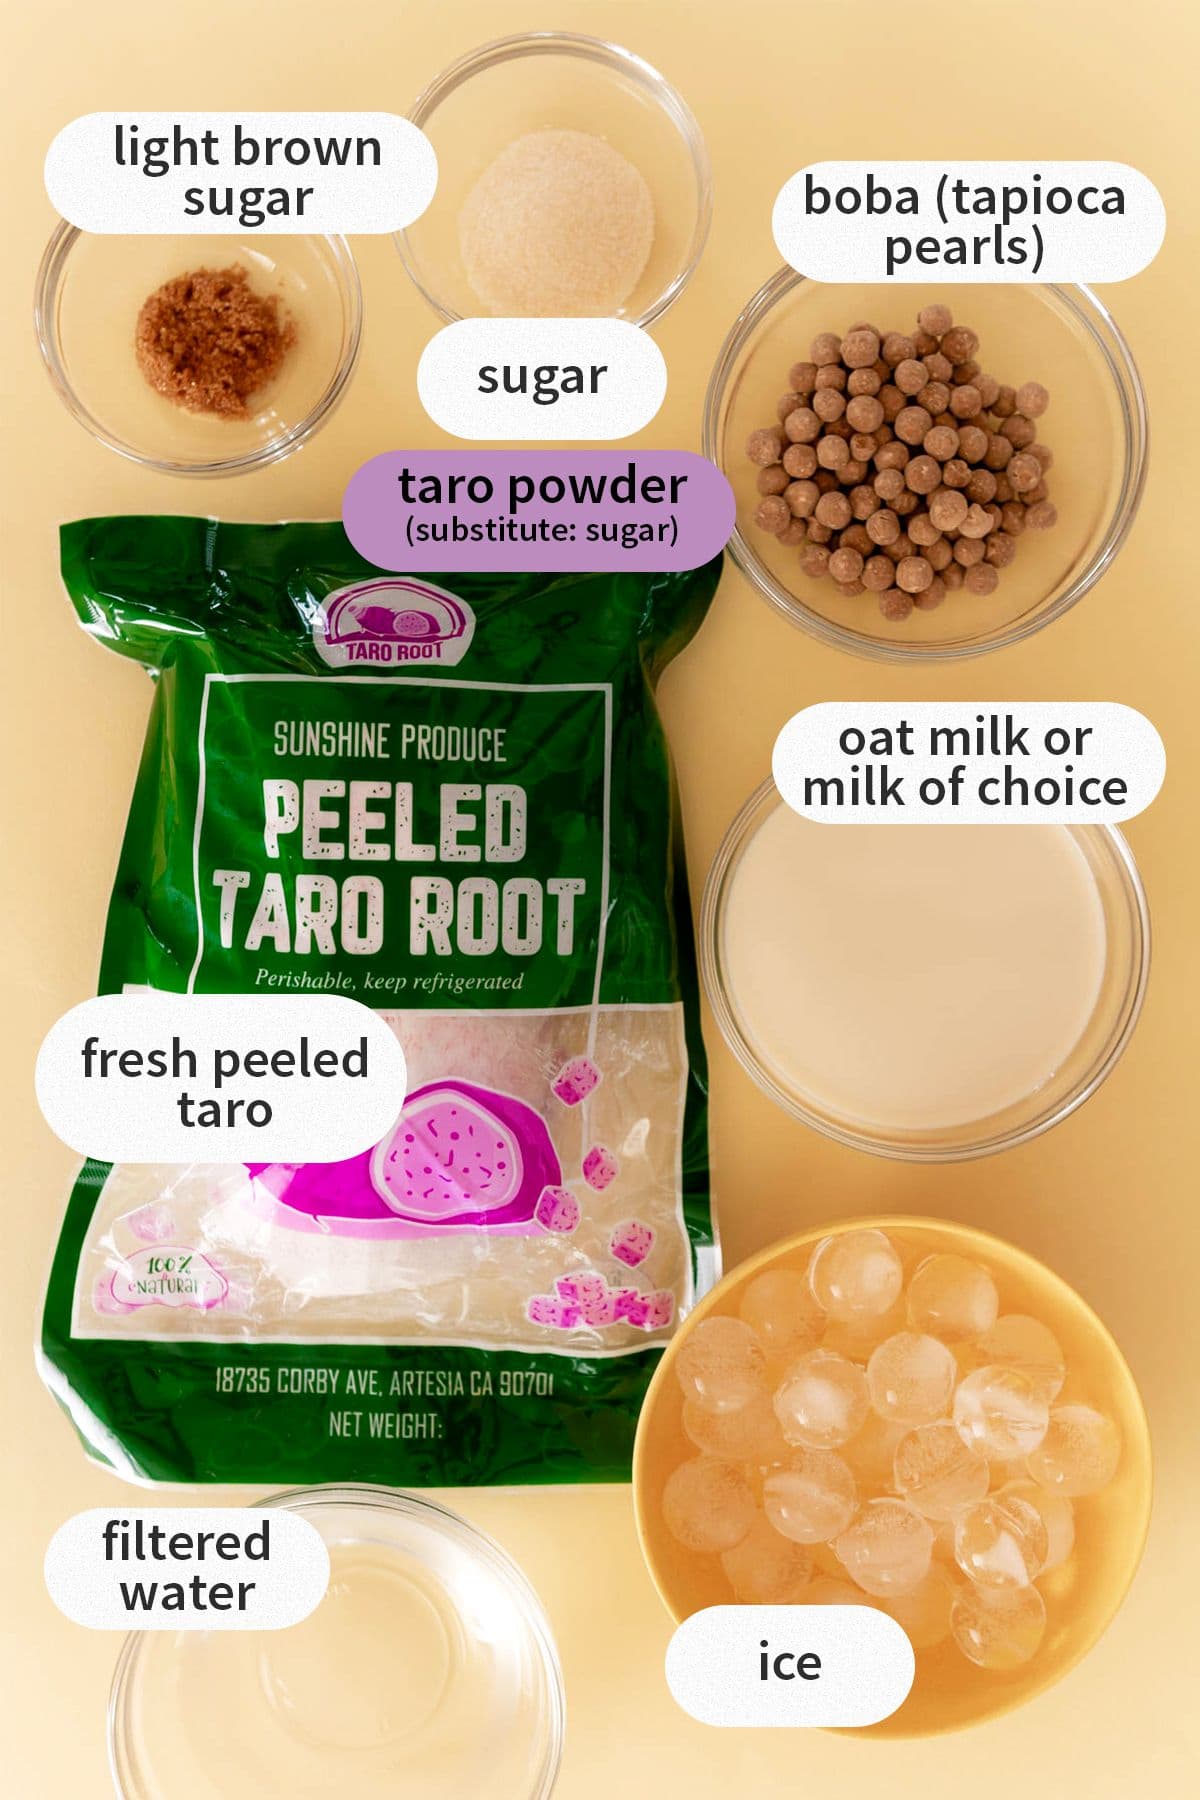 Taro boba milk tea ingredients laid out over a yellow background and labeled with: light brown sugar, sugar, taro powder (substitute: sugar), boba (tapioca pearls), fresh peeled taro, oat milk or milk of choice, filtered water, and ice.